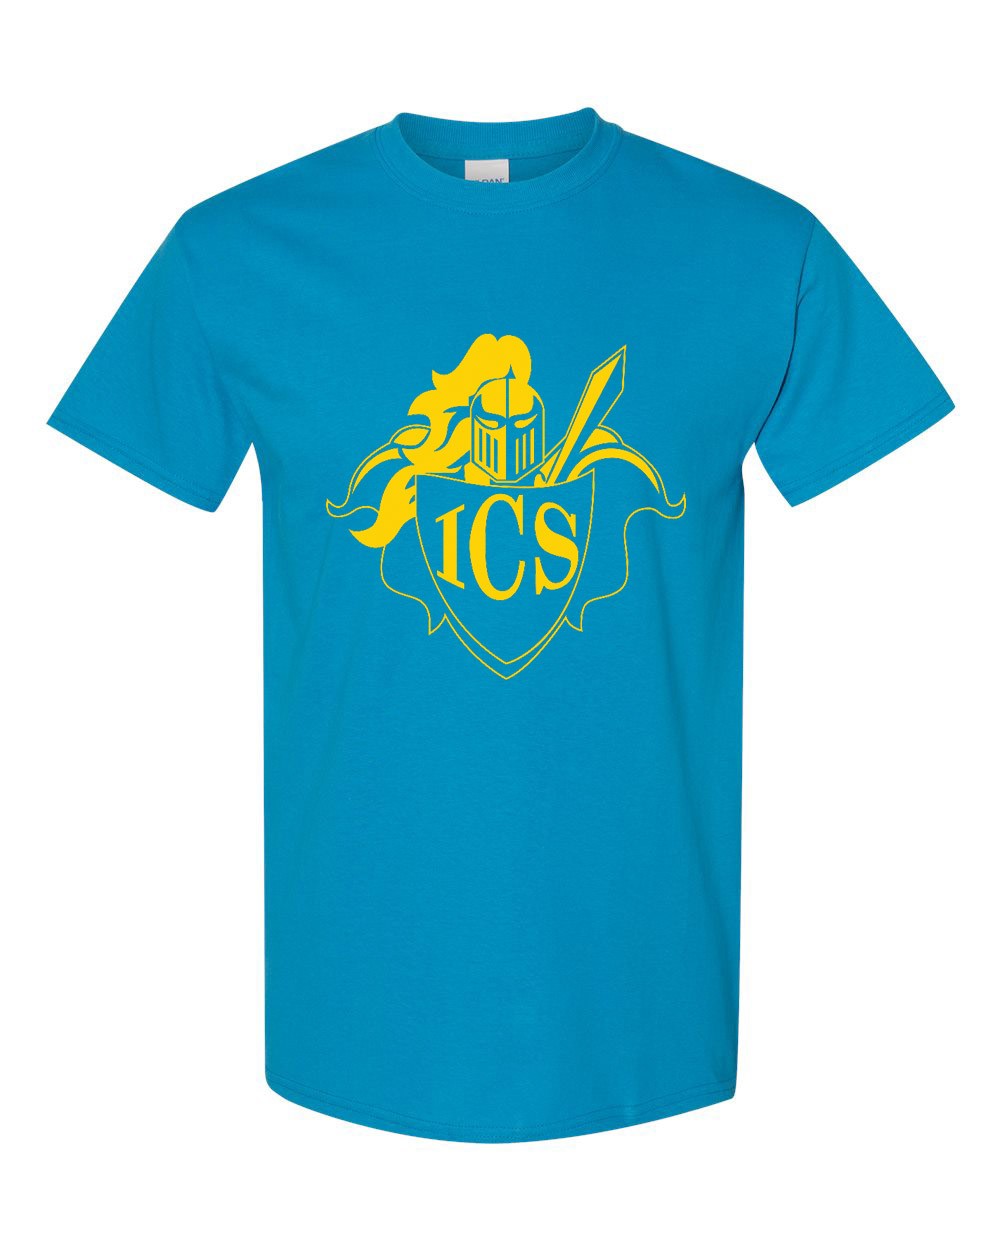 ICS Spirit S/S T-Shirt w/ Yellow Logo - Please Allow 2-3 Weeks for Delivery